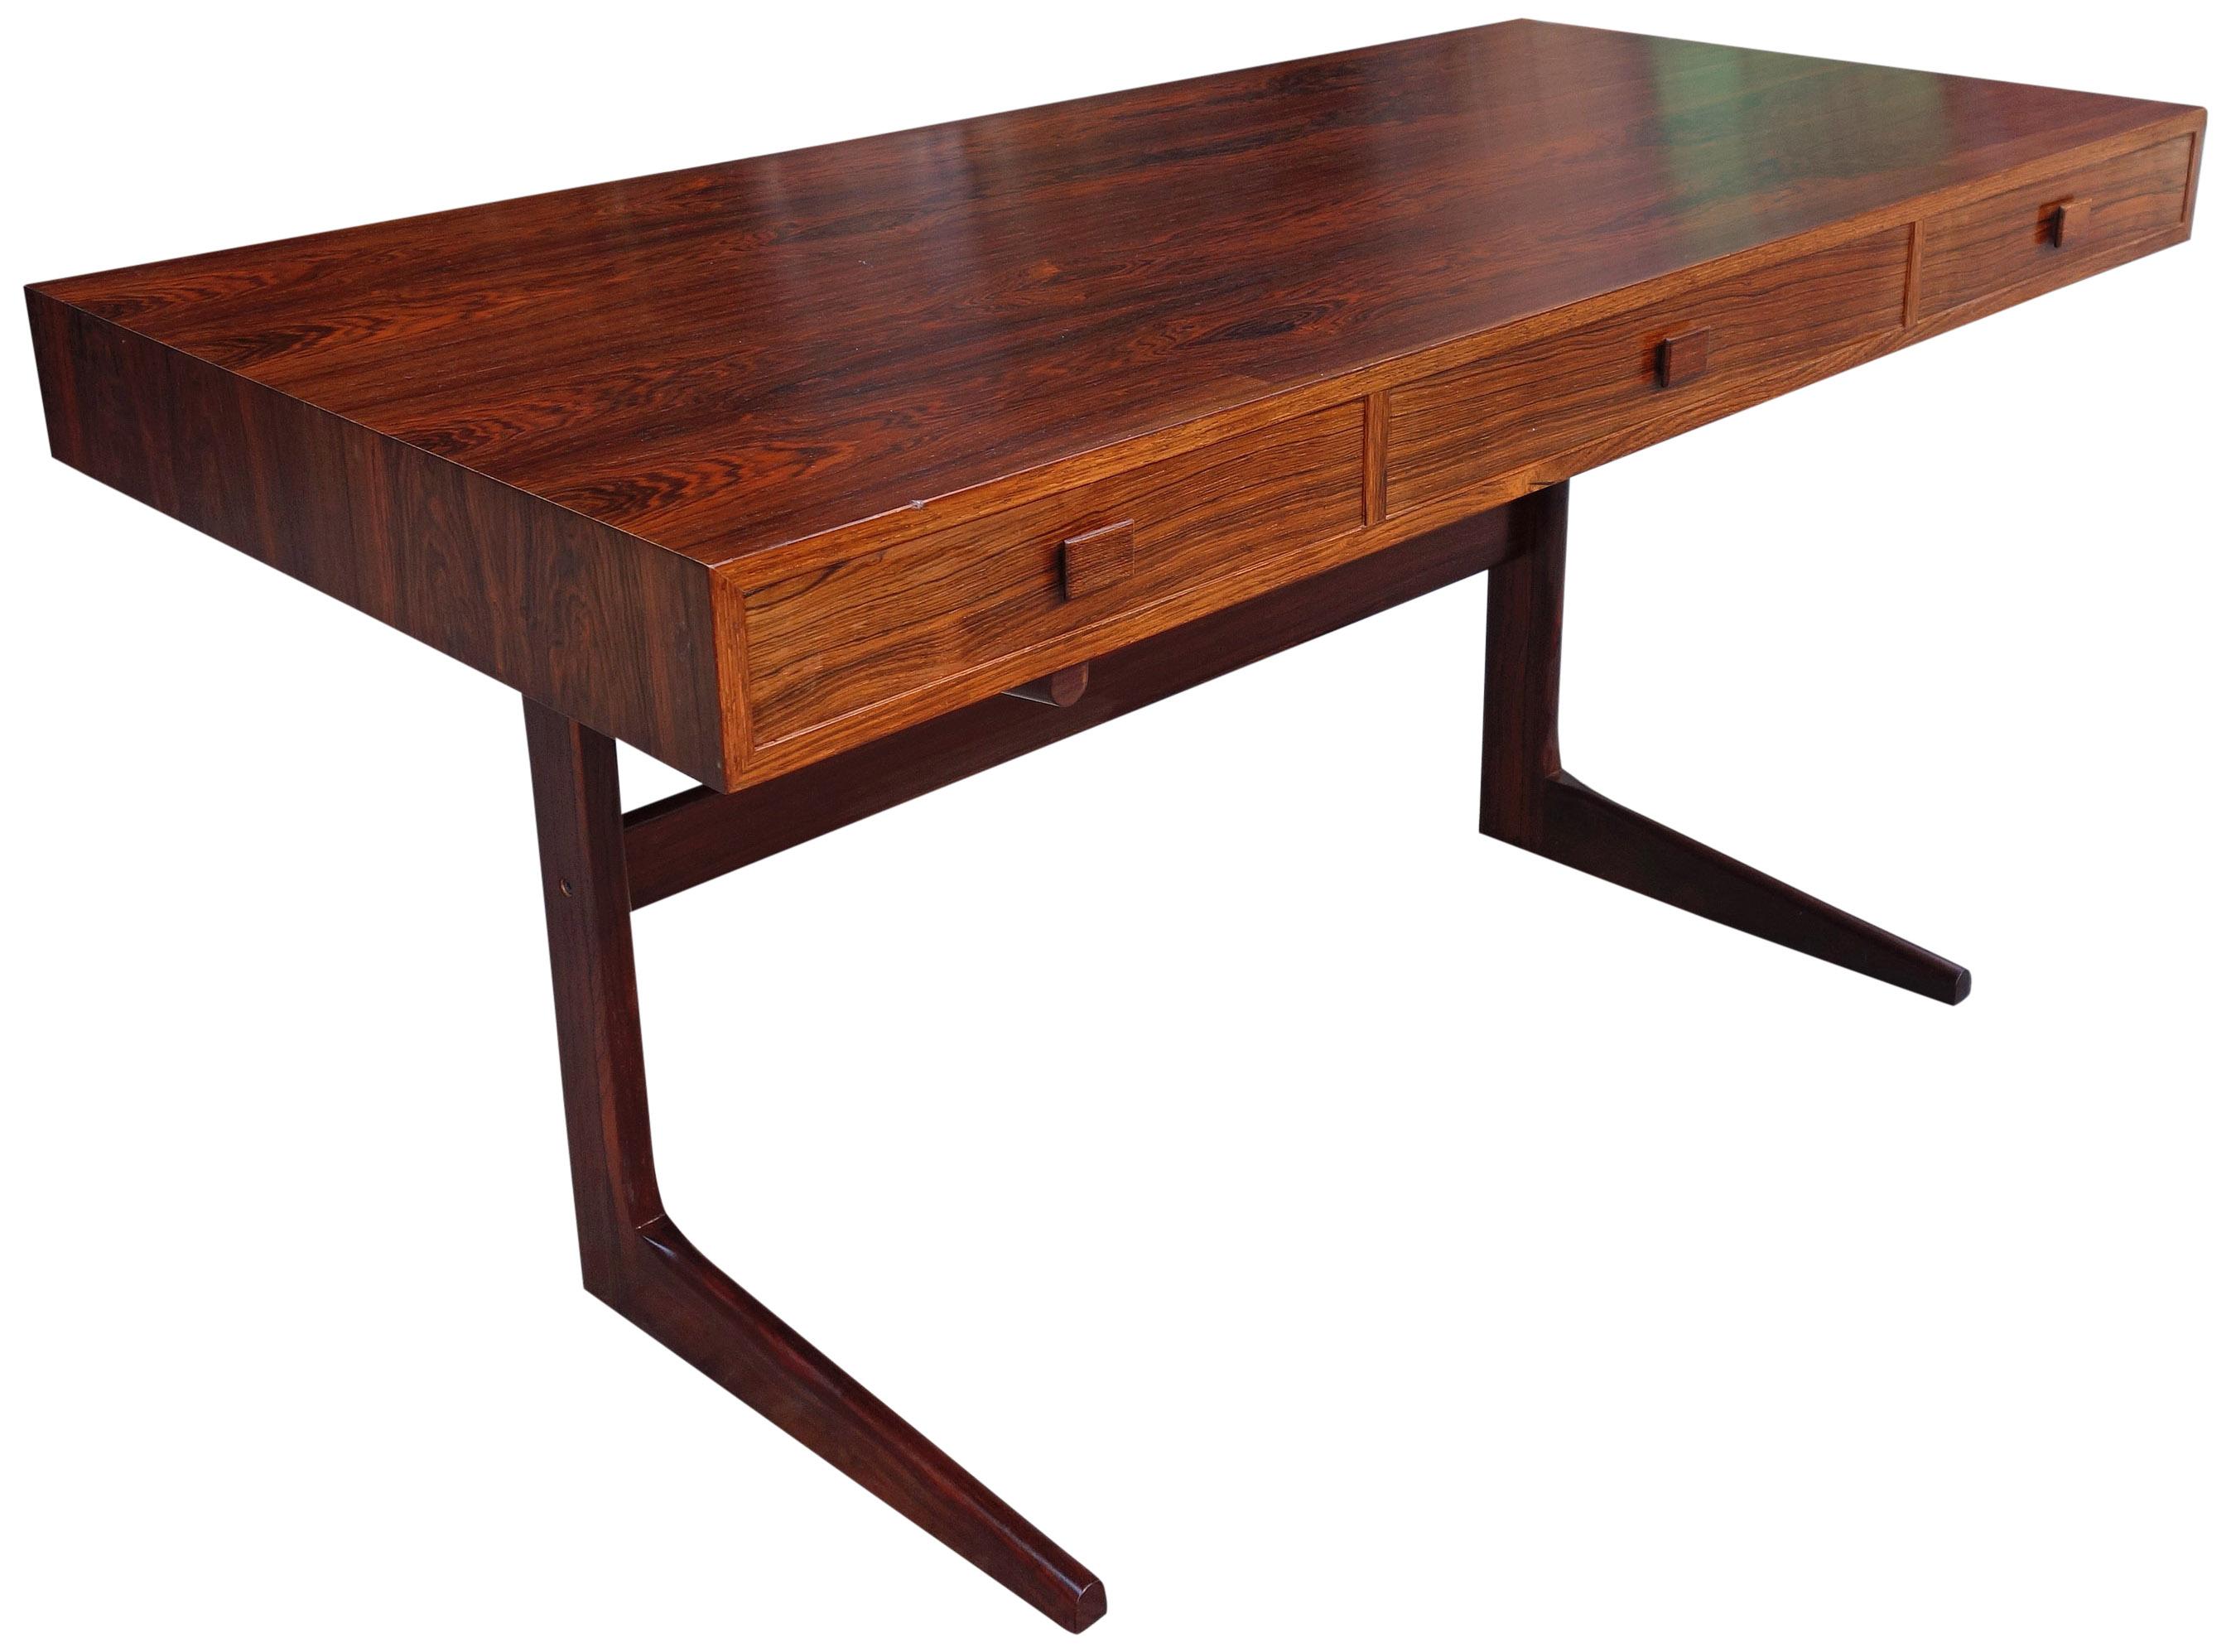 For your consideration is this gorgeous desk featuring highly figured Brazilian rosewood on a rectangular form with three drawers, and a solid rosewood trestle base. A silver metal label is located on the underside. The drawers easily slide and are